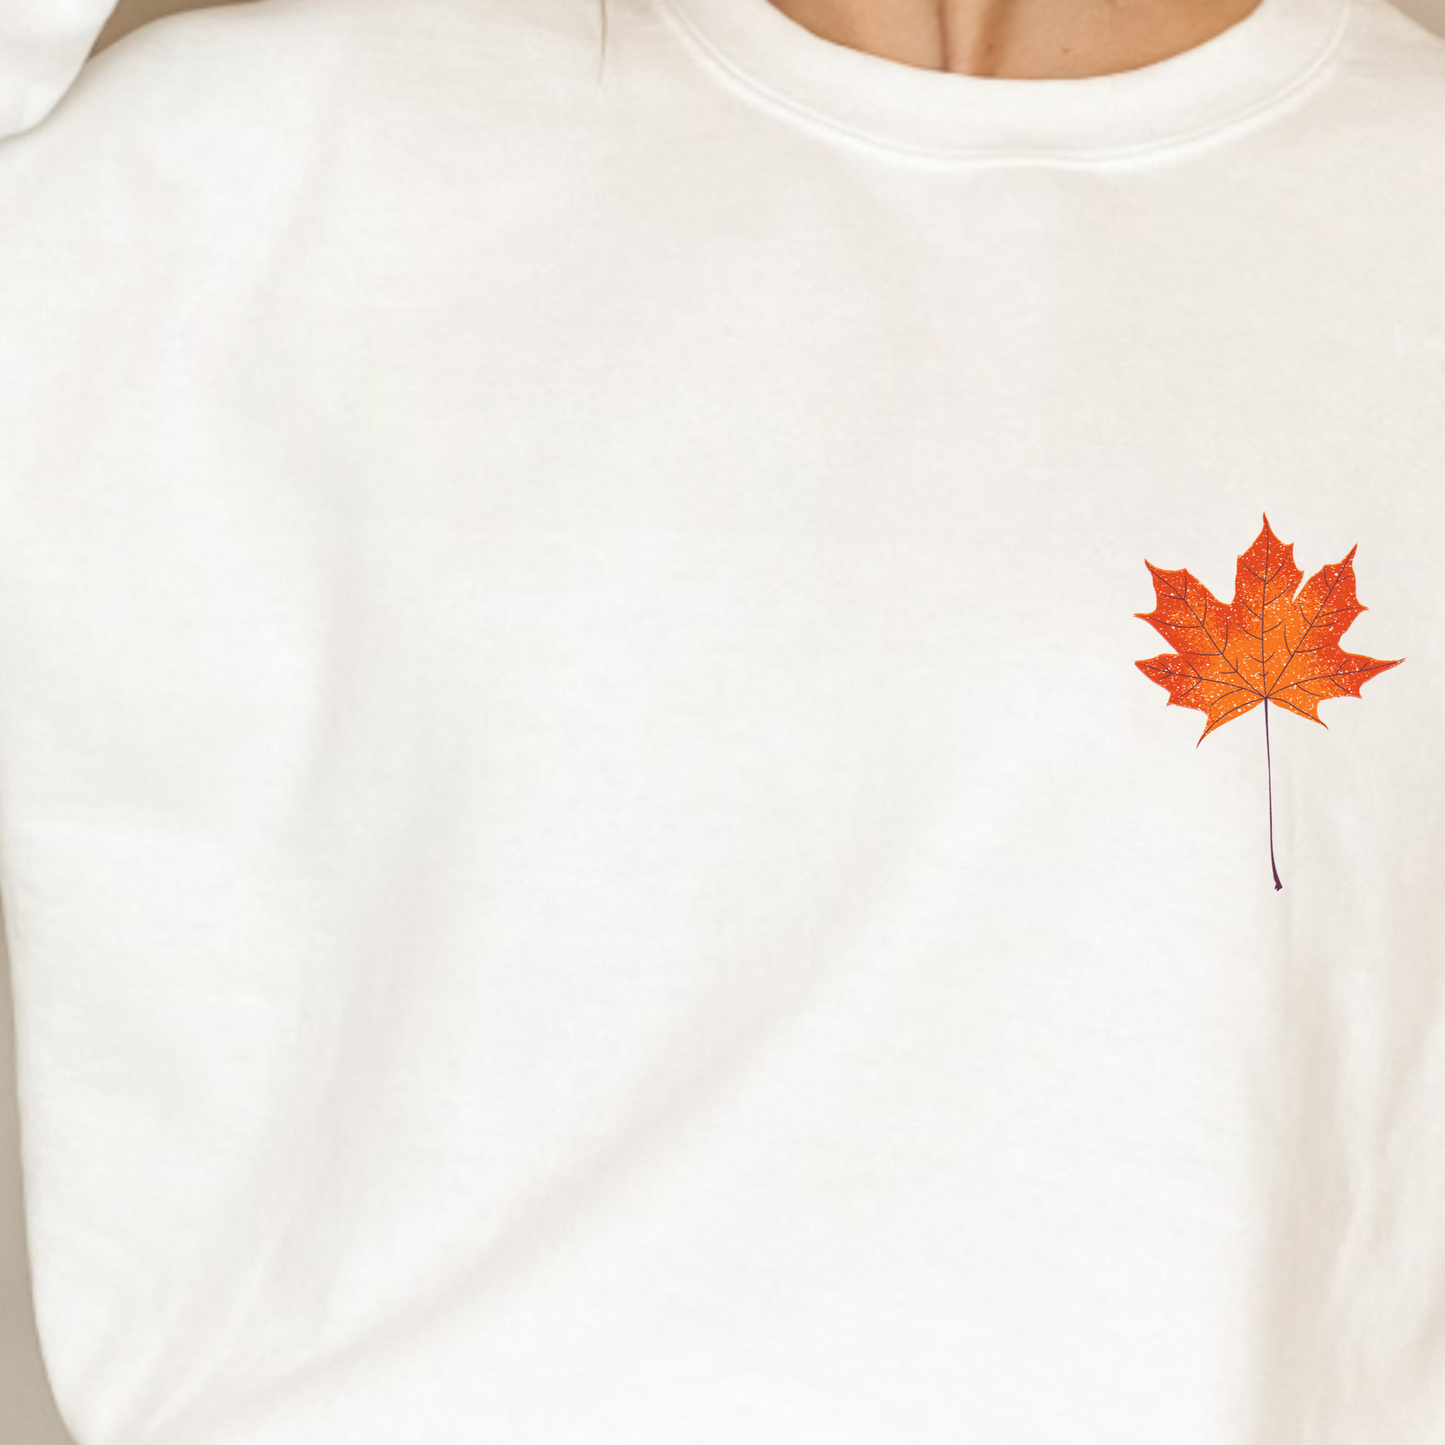 (Shirt not included) Fall Leaf POCKET - Clear Film Transfer